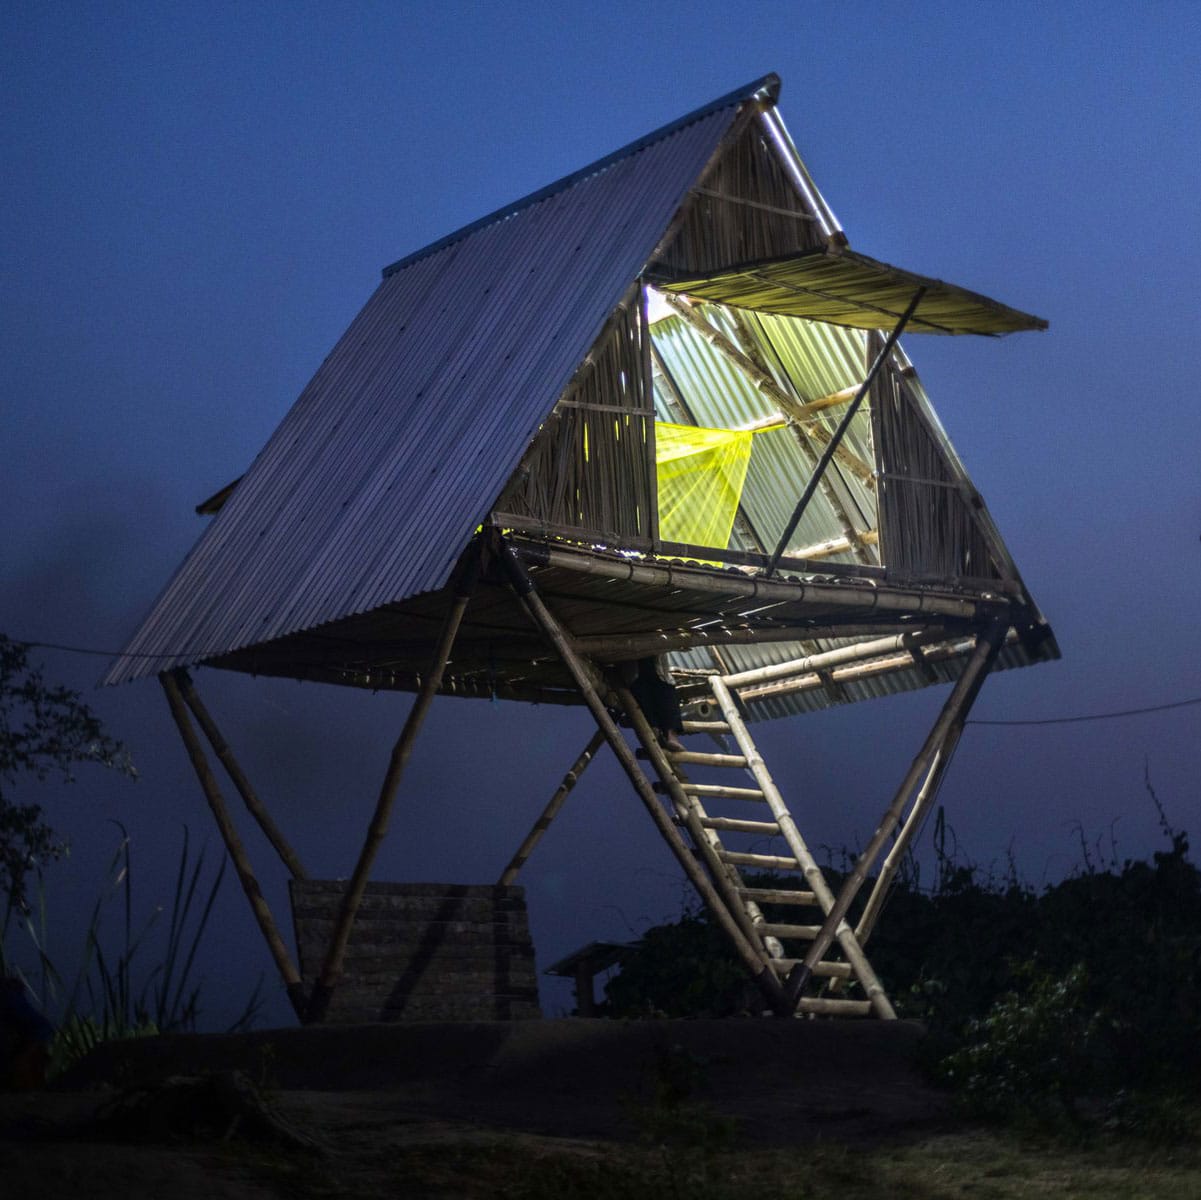 A triangular building on stilts is made from wood, reeds, and corrugated iron.